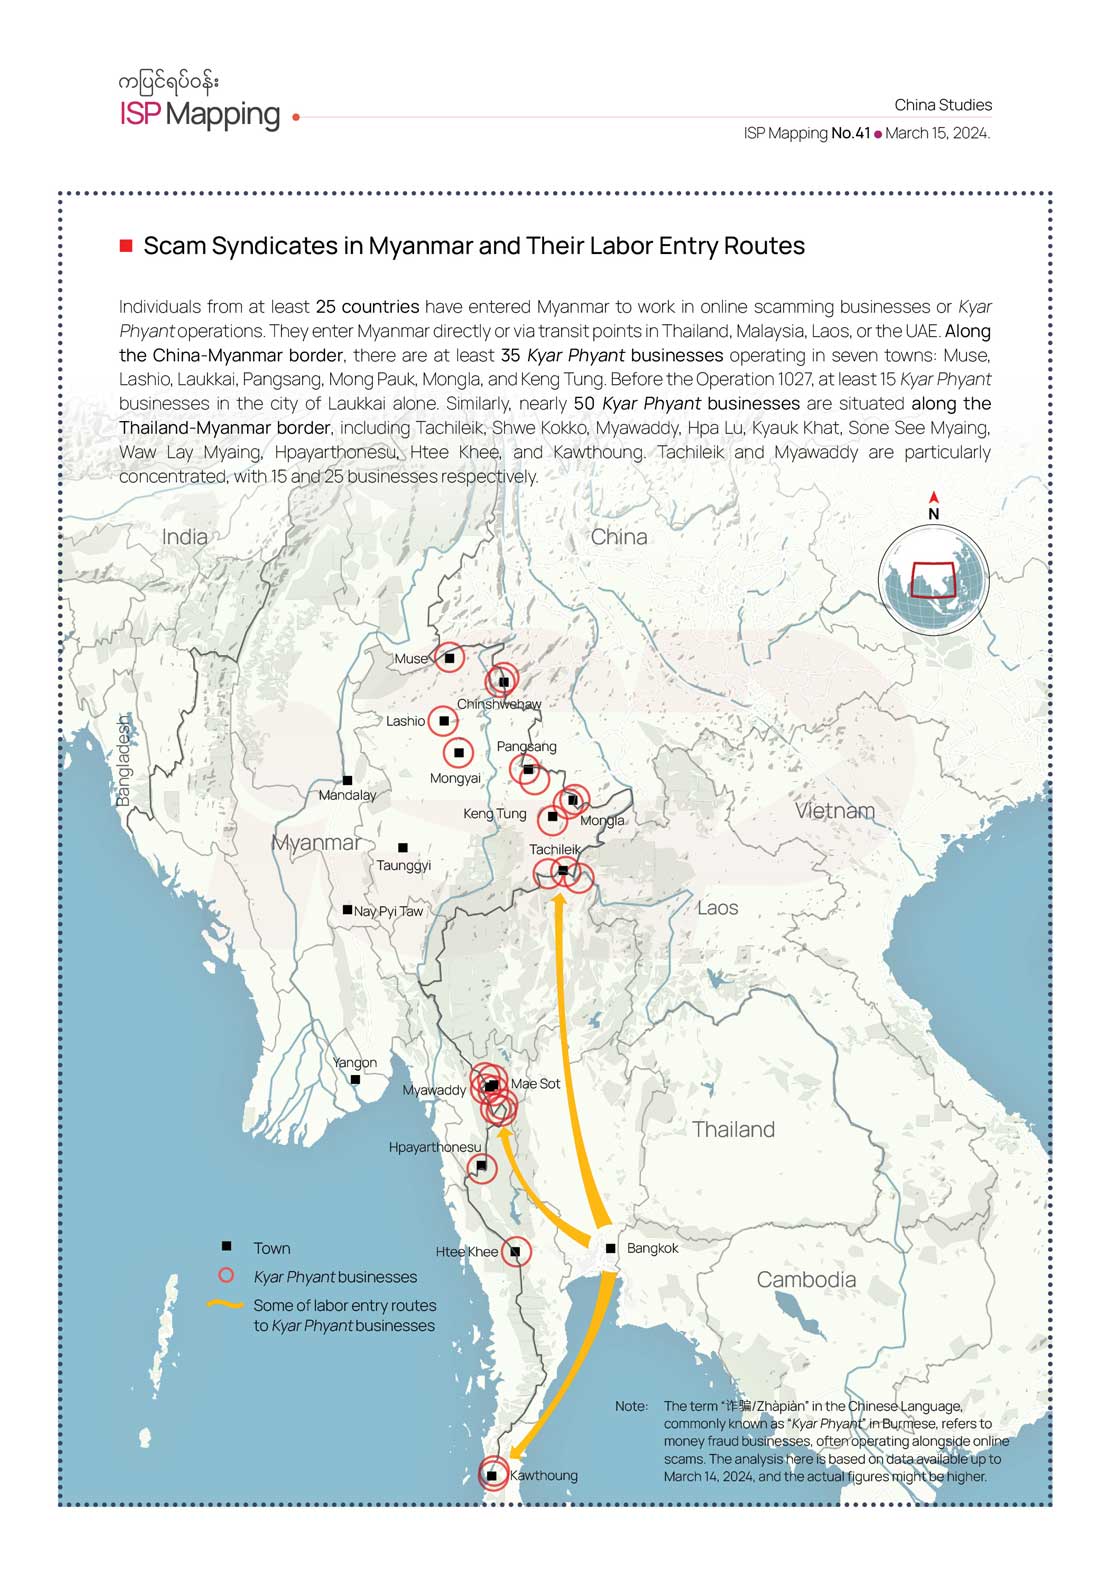 Scam Syndicates in Myanmar and Their Labor Entry Routes